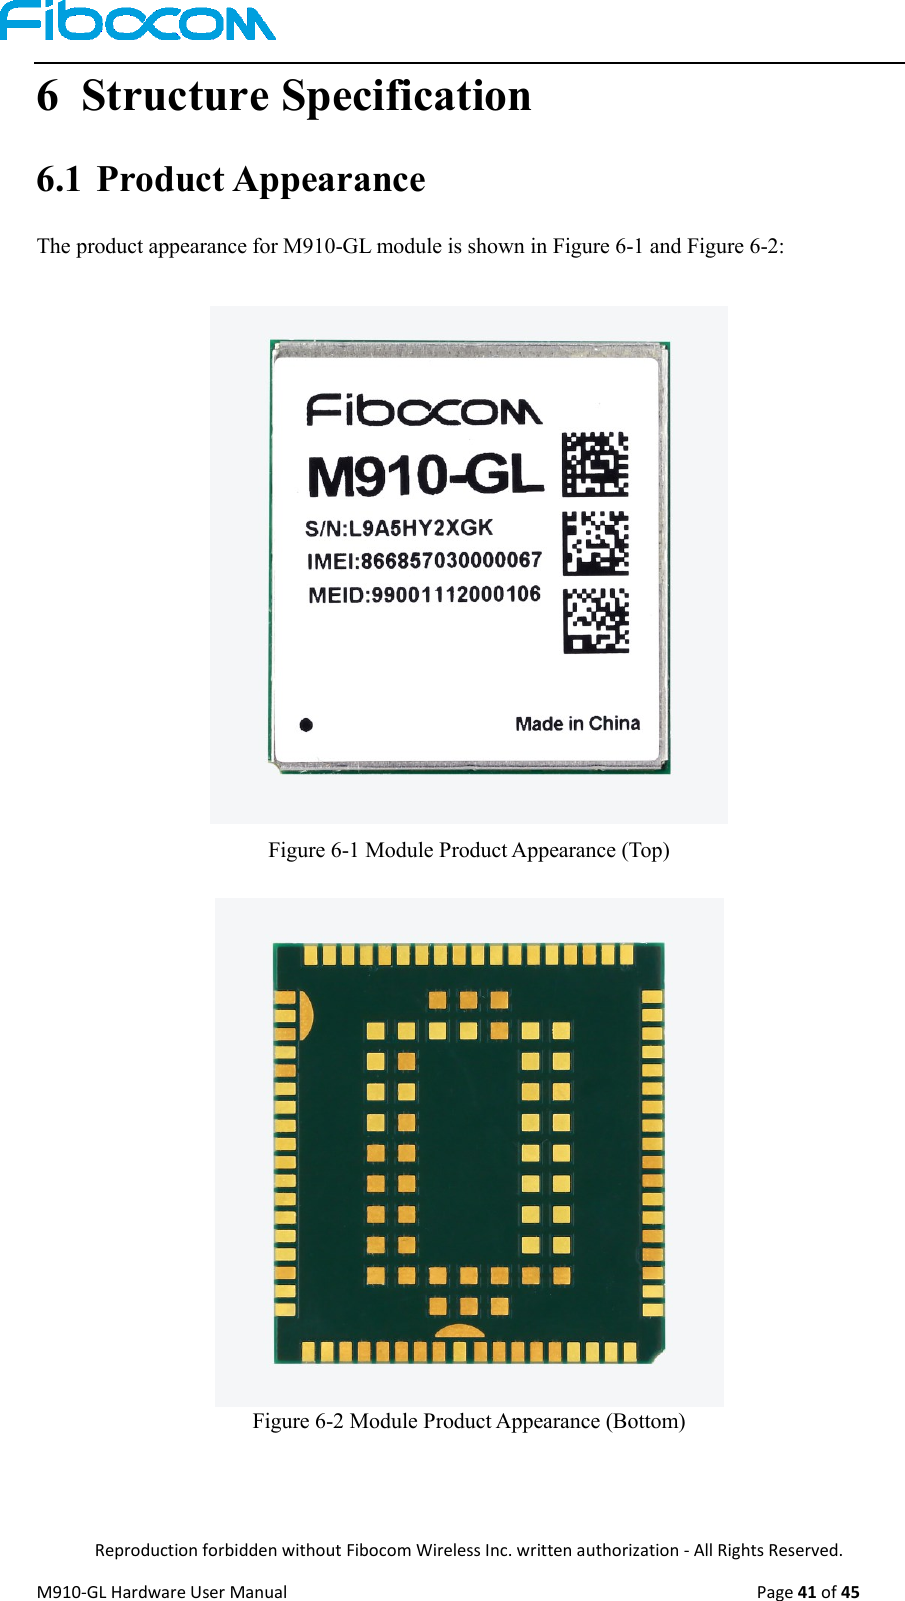  Reproduction forbidden without Fibocom Wireless Inc. written authorization - All Rights Reserved. M910-GL Hardware User Manual                                                                                                  Page 41 of 45  6 Structure Specification 6.1 Product Appearance The product appearance for M910-GL module is shown in Figure 6-1 and Figure 6-2:                  Figure 6-1 Module Product Appearance (Top)                   Figure 6-2 Module Product Appearance (Bottom)    